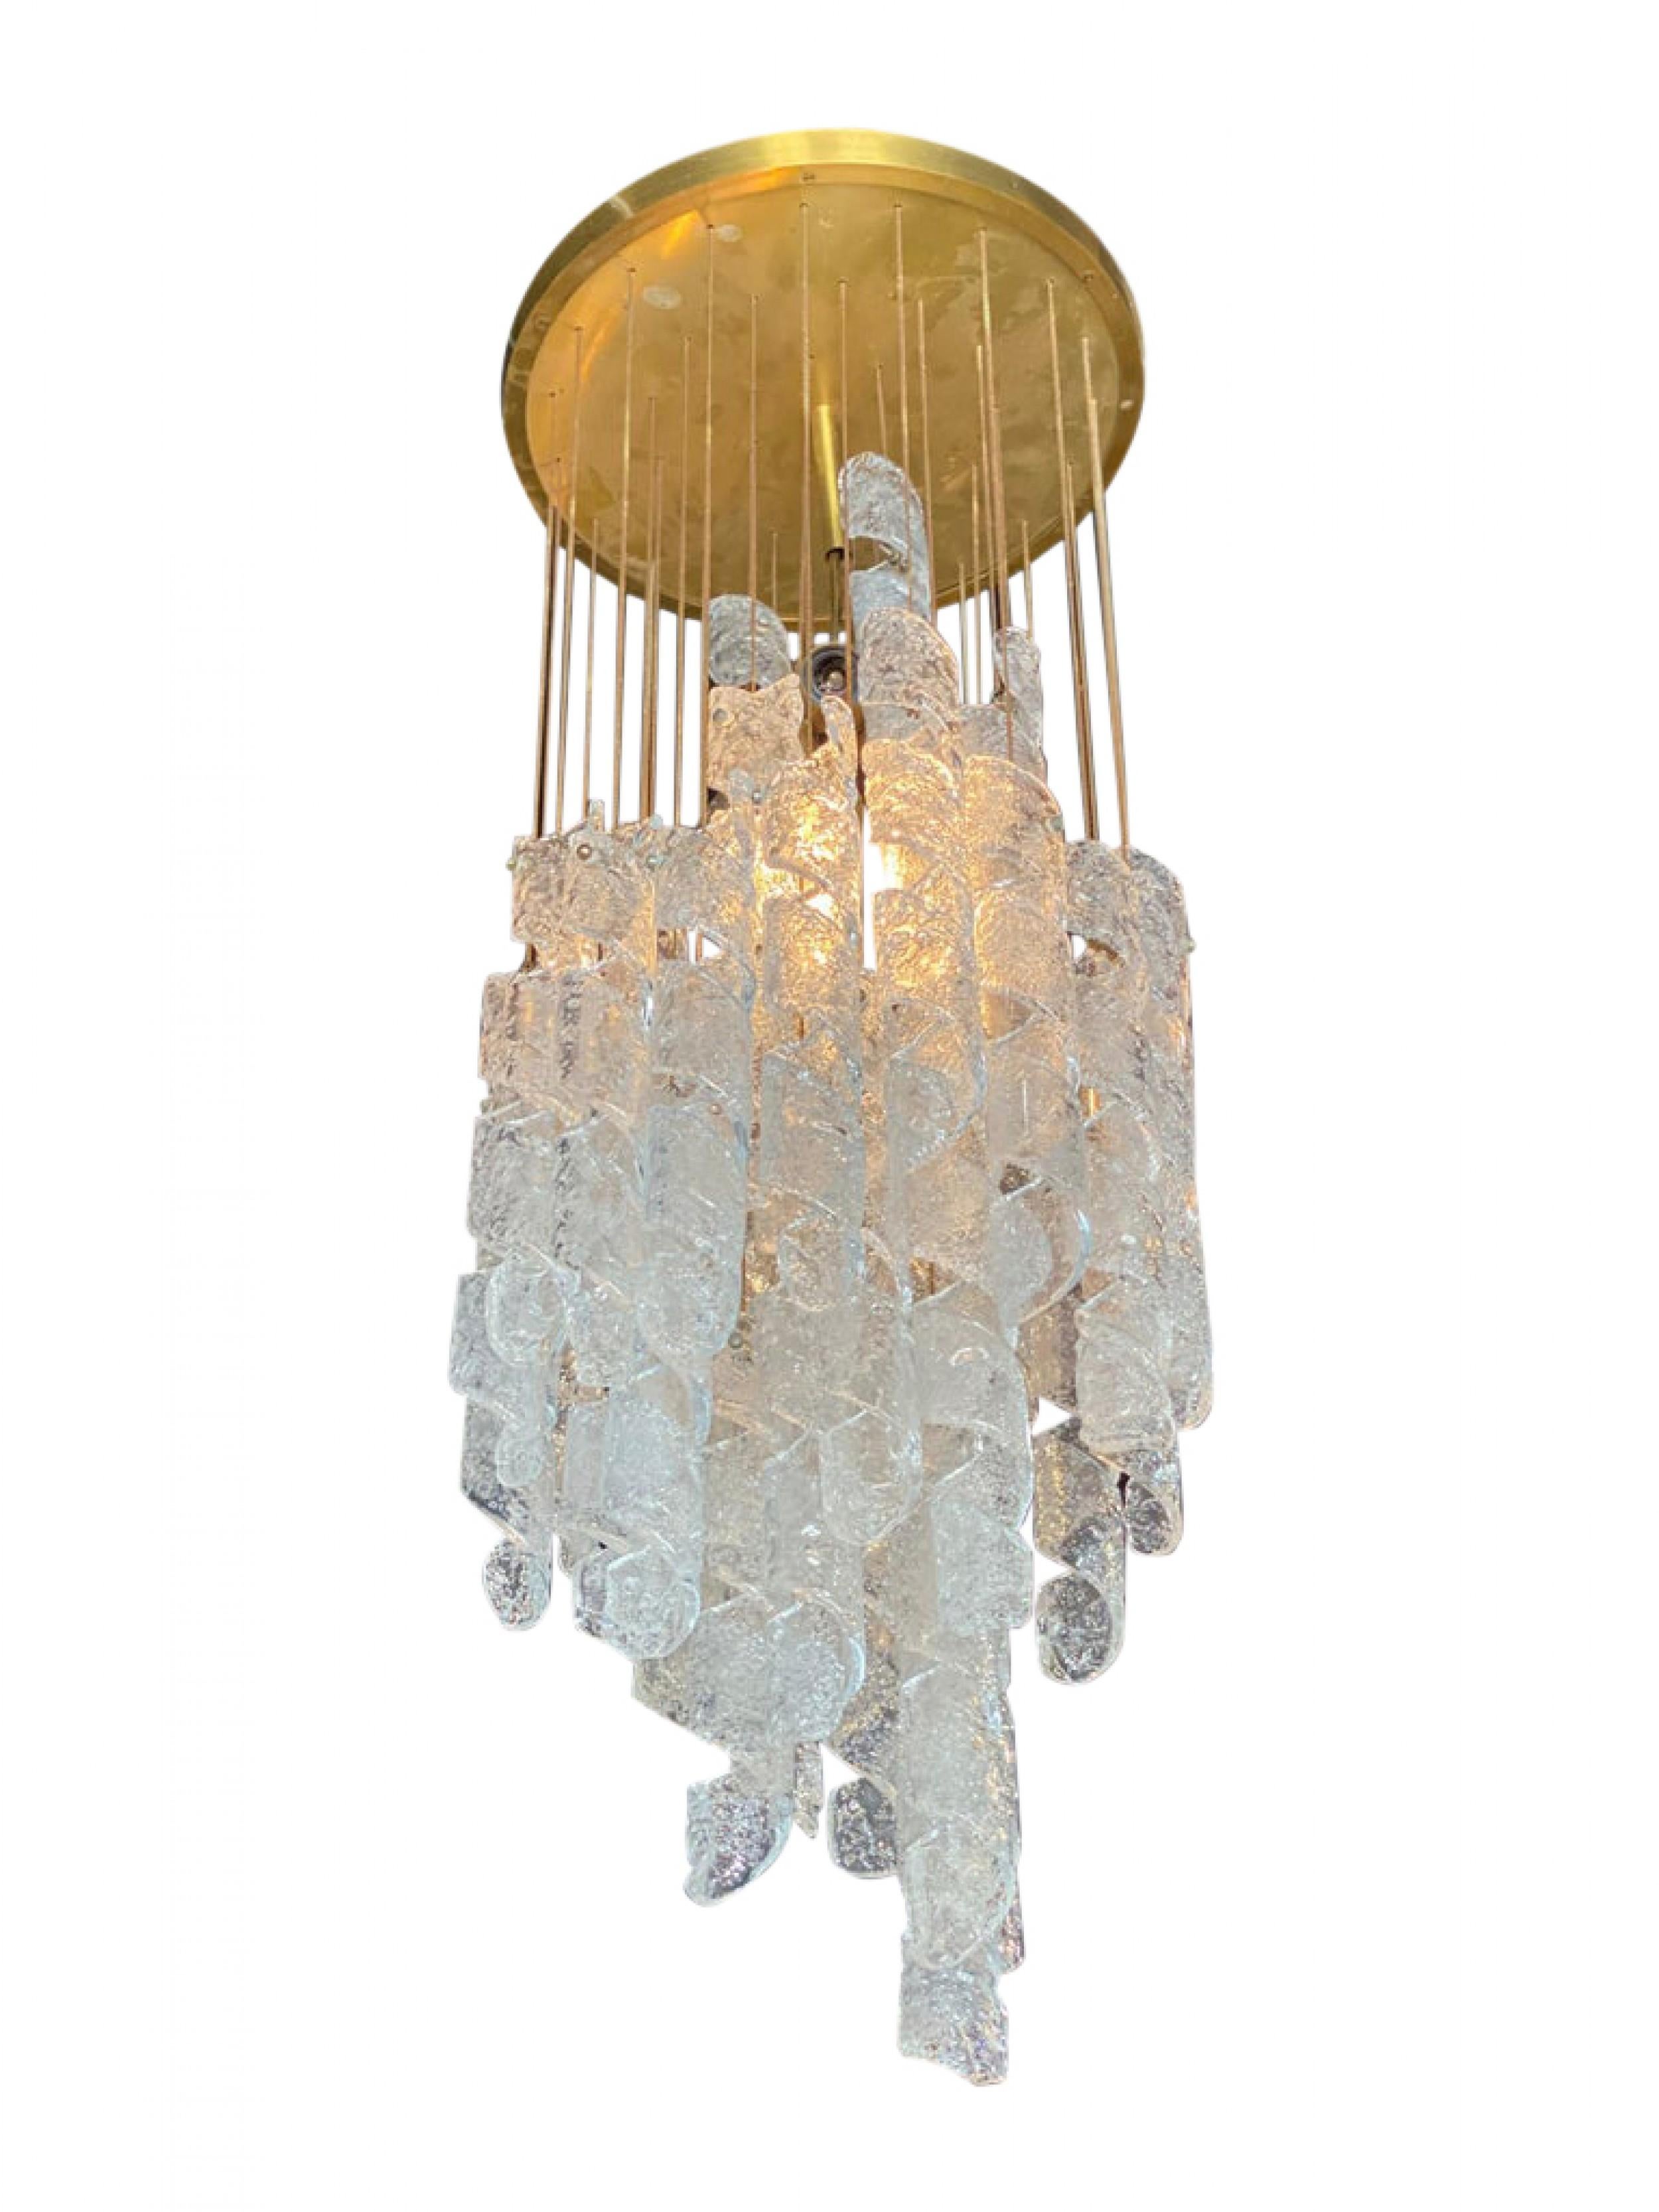 Pair of Italian Modern Hand Blown Glass and Brass Chandeliers, Mazzega For Sale 1